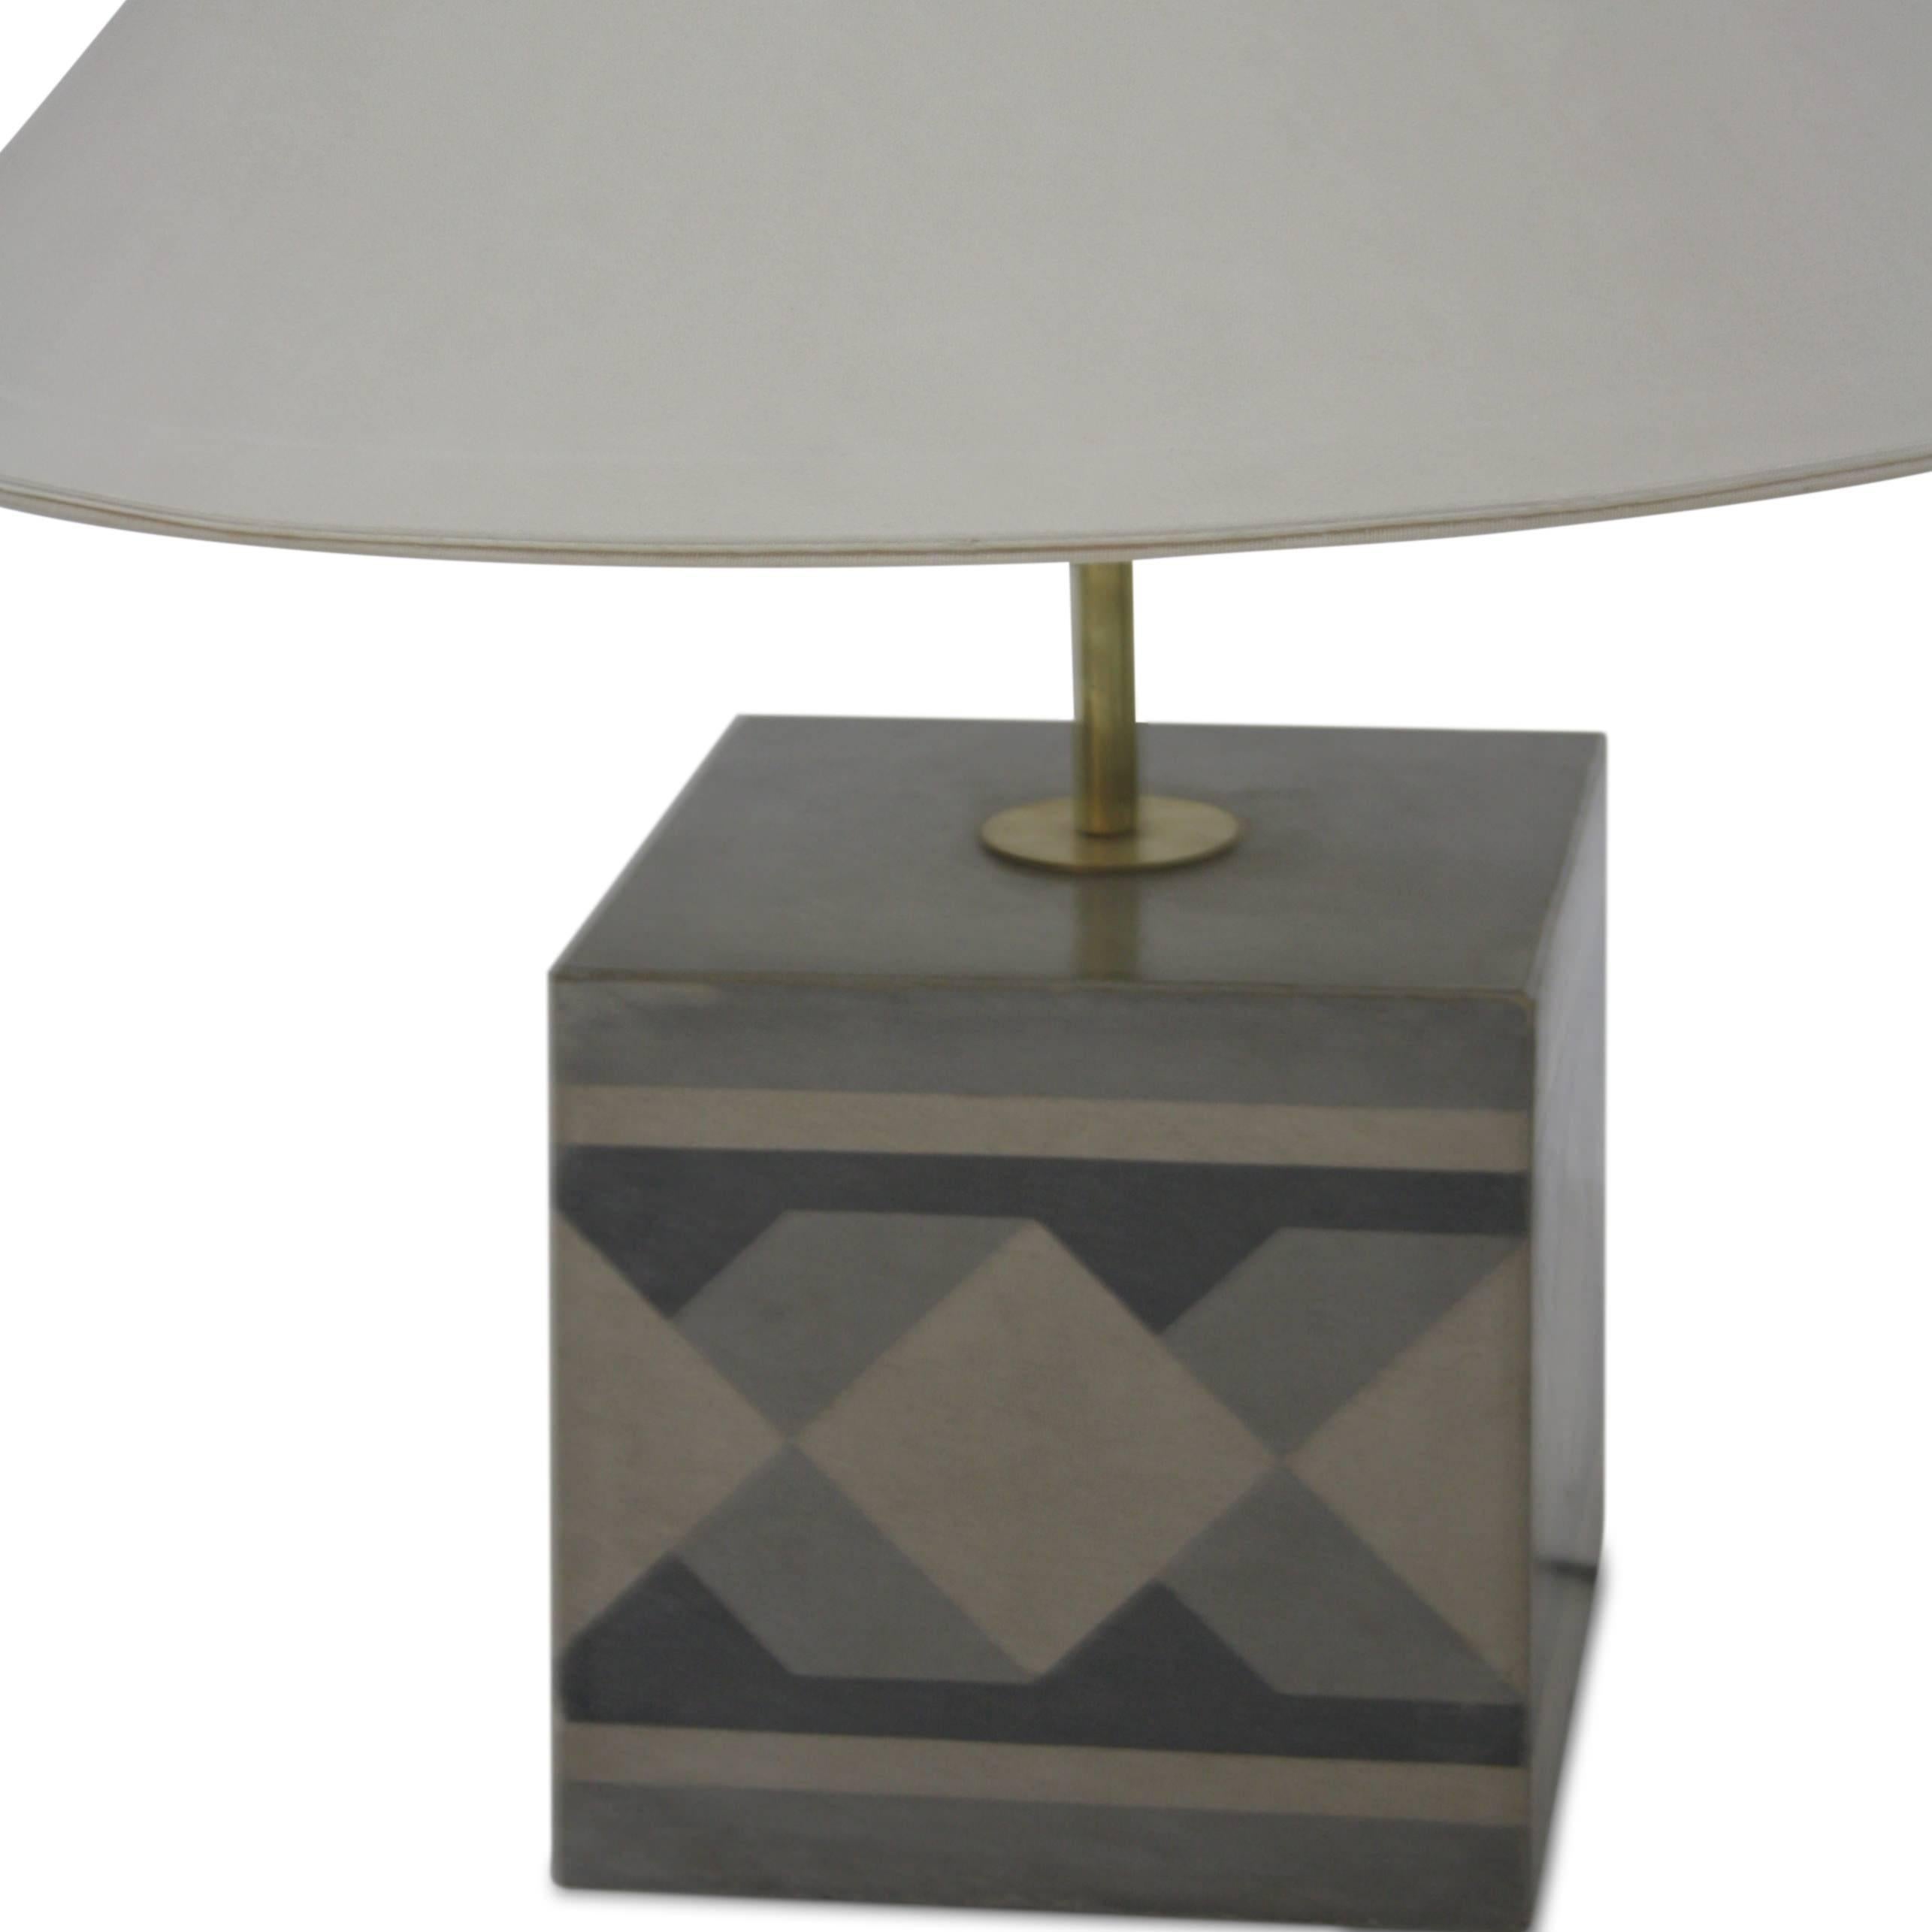 Pair of table lamps on a square ceramic base with a geometrical pattern in different shades of grey.

For the electrification we assume no liability and no warranty.